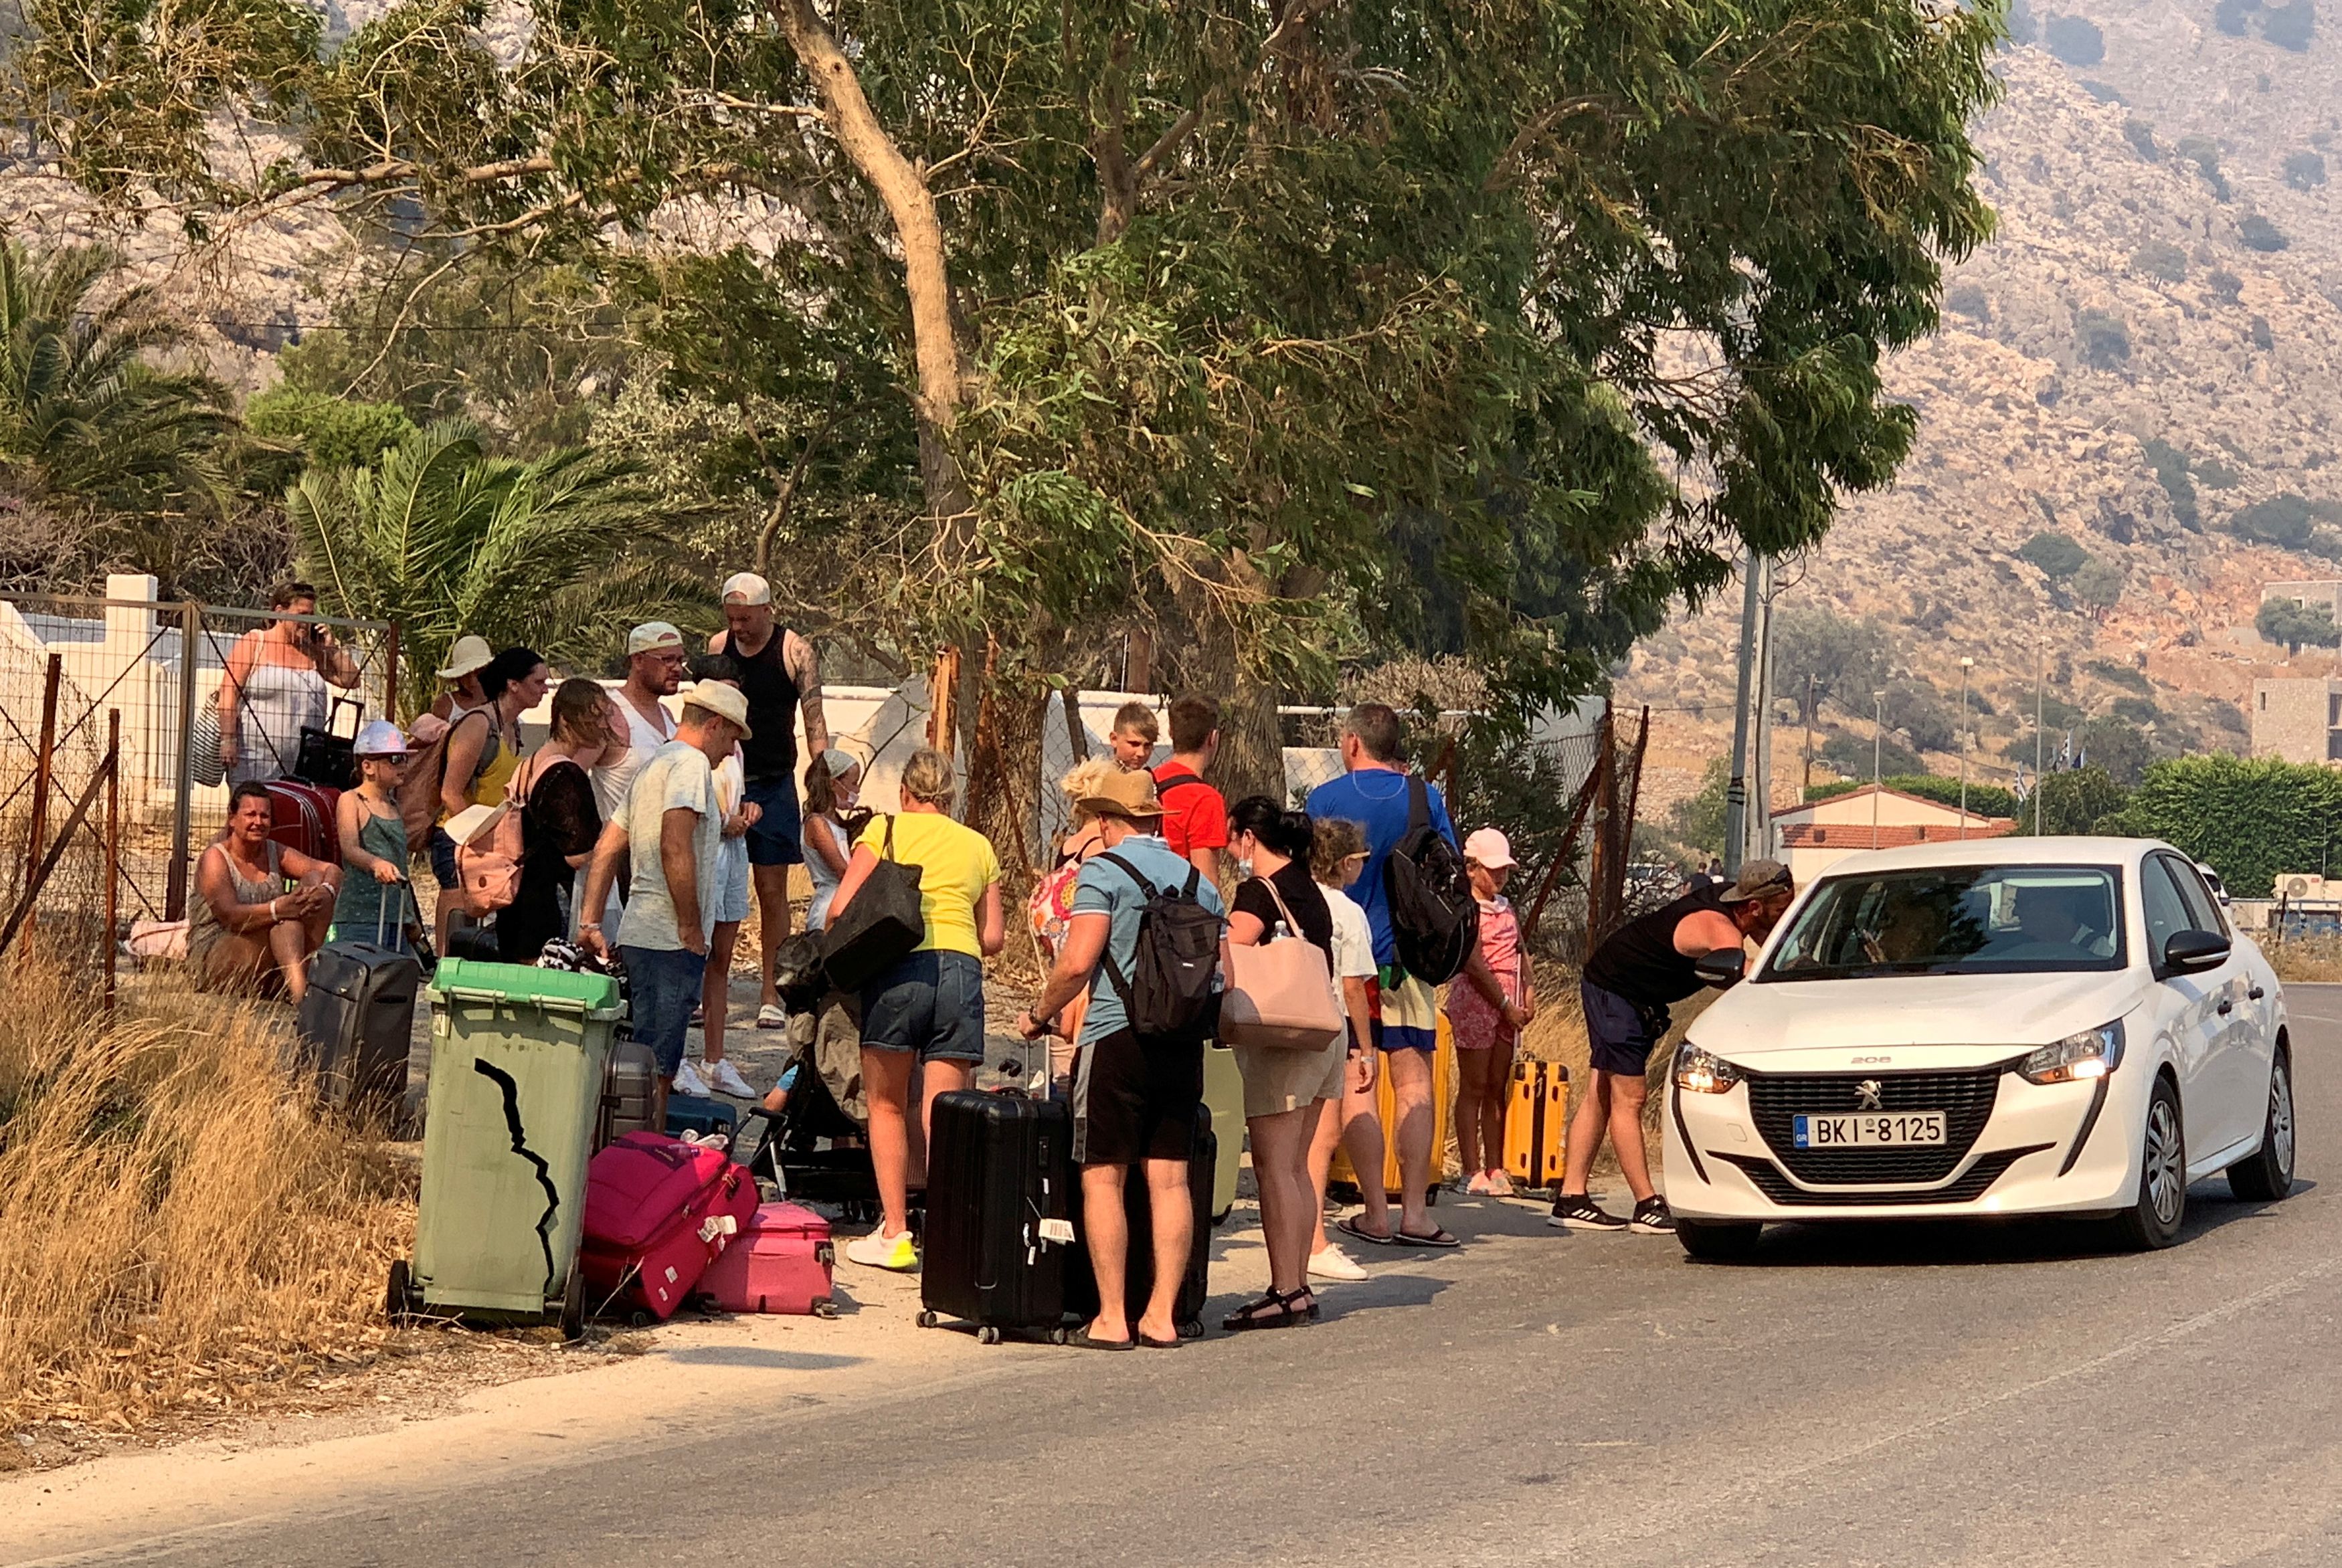 a-wildfire-is-raging-out-of-control-on-rhodes-forcing-tourist-evacuations1